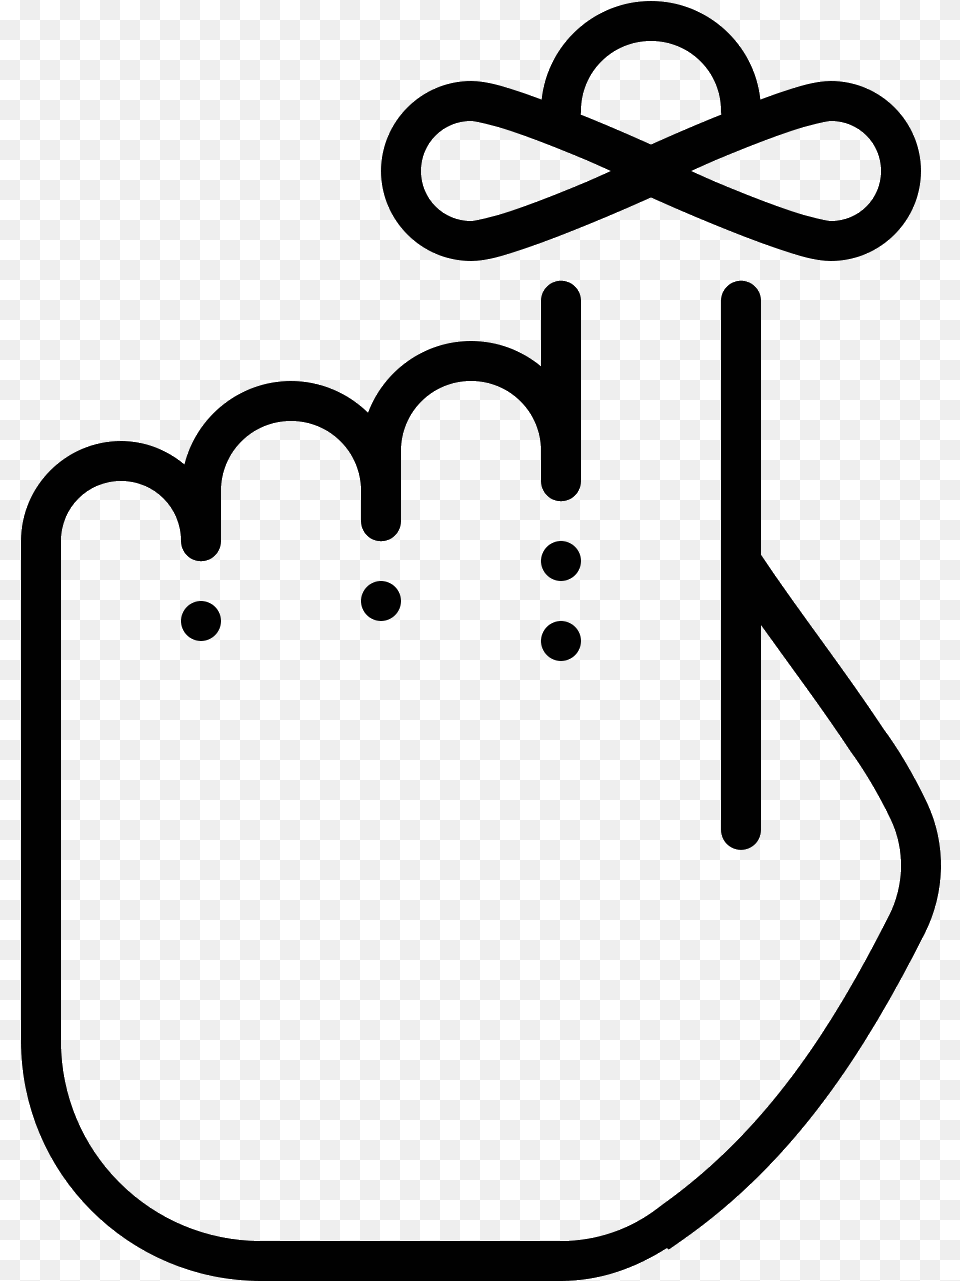 This Is A Picture Of A Left Hand With The Index Finger Reminder Icon, Gray Png Image